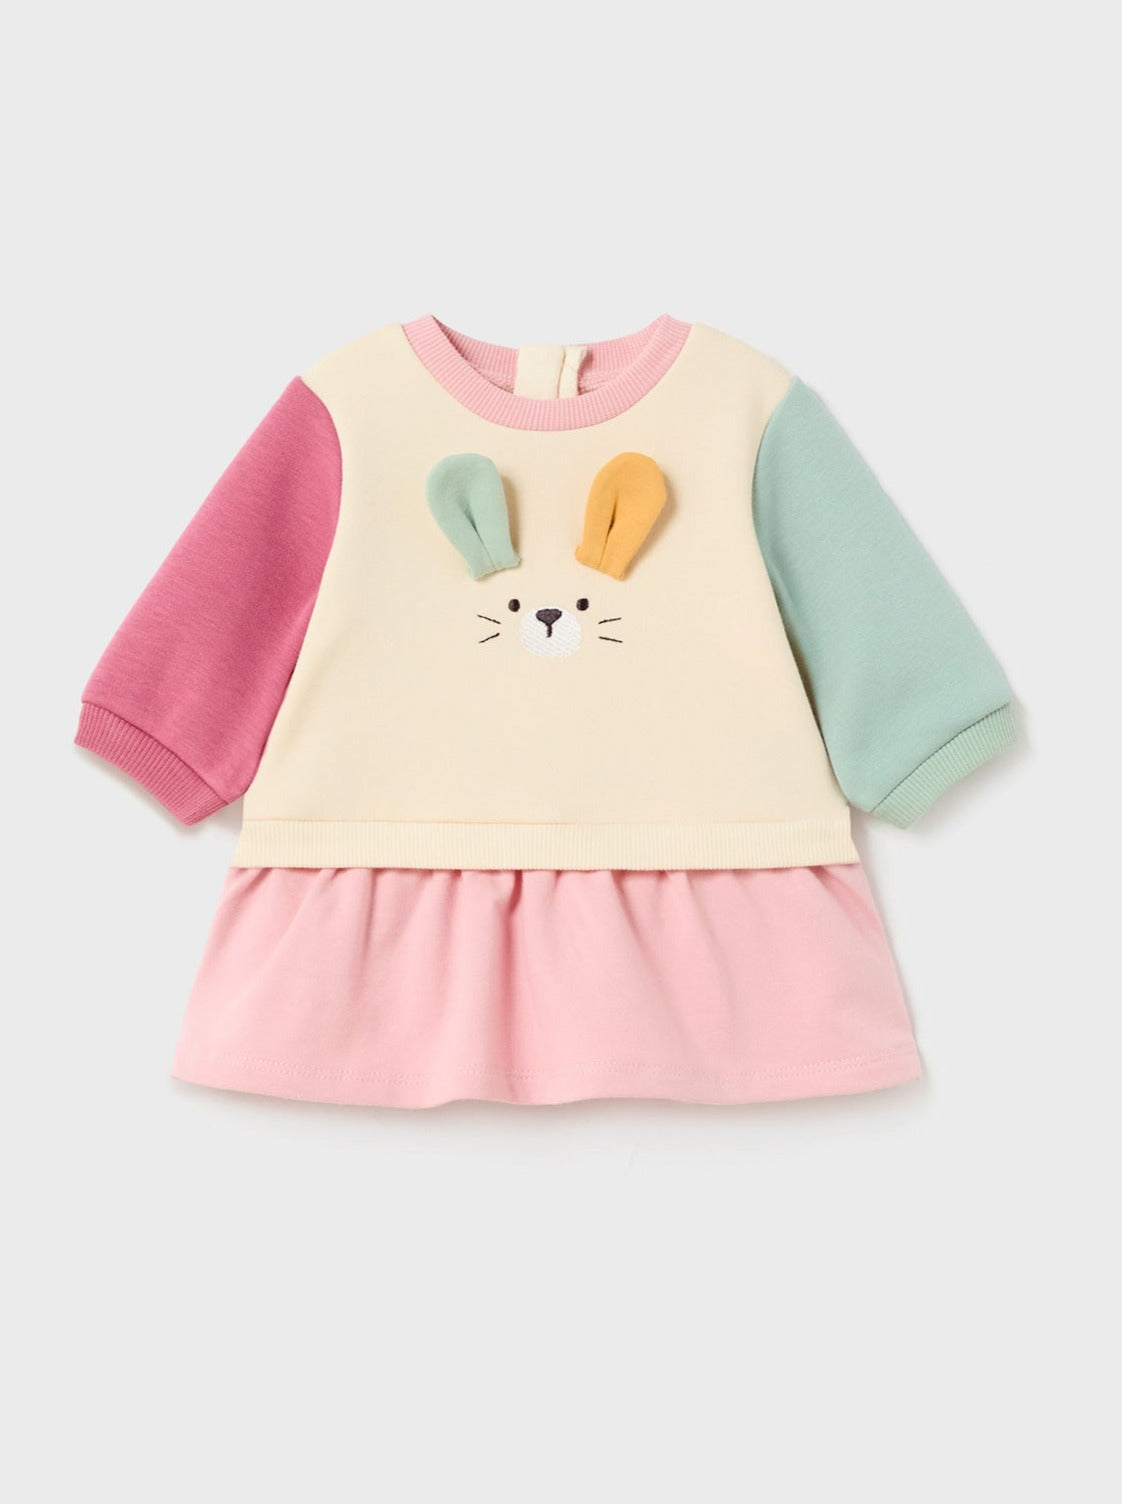 Mayoral Baby Multi Colour Blocked Bunny Dress _2846-51